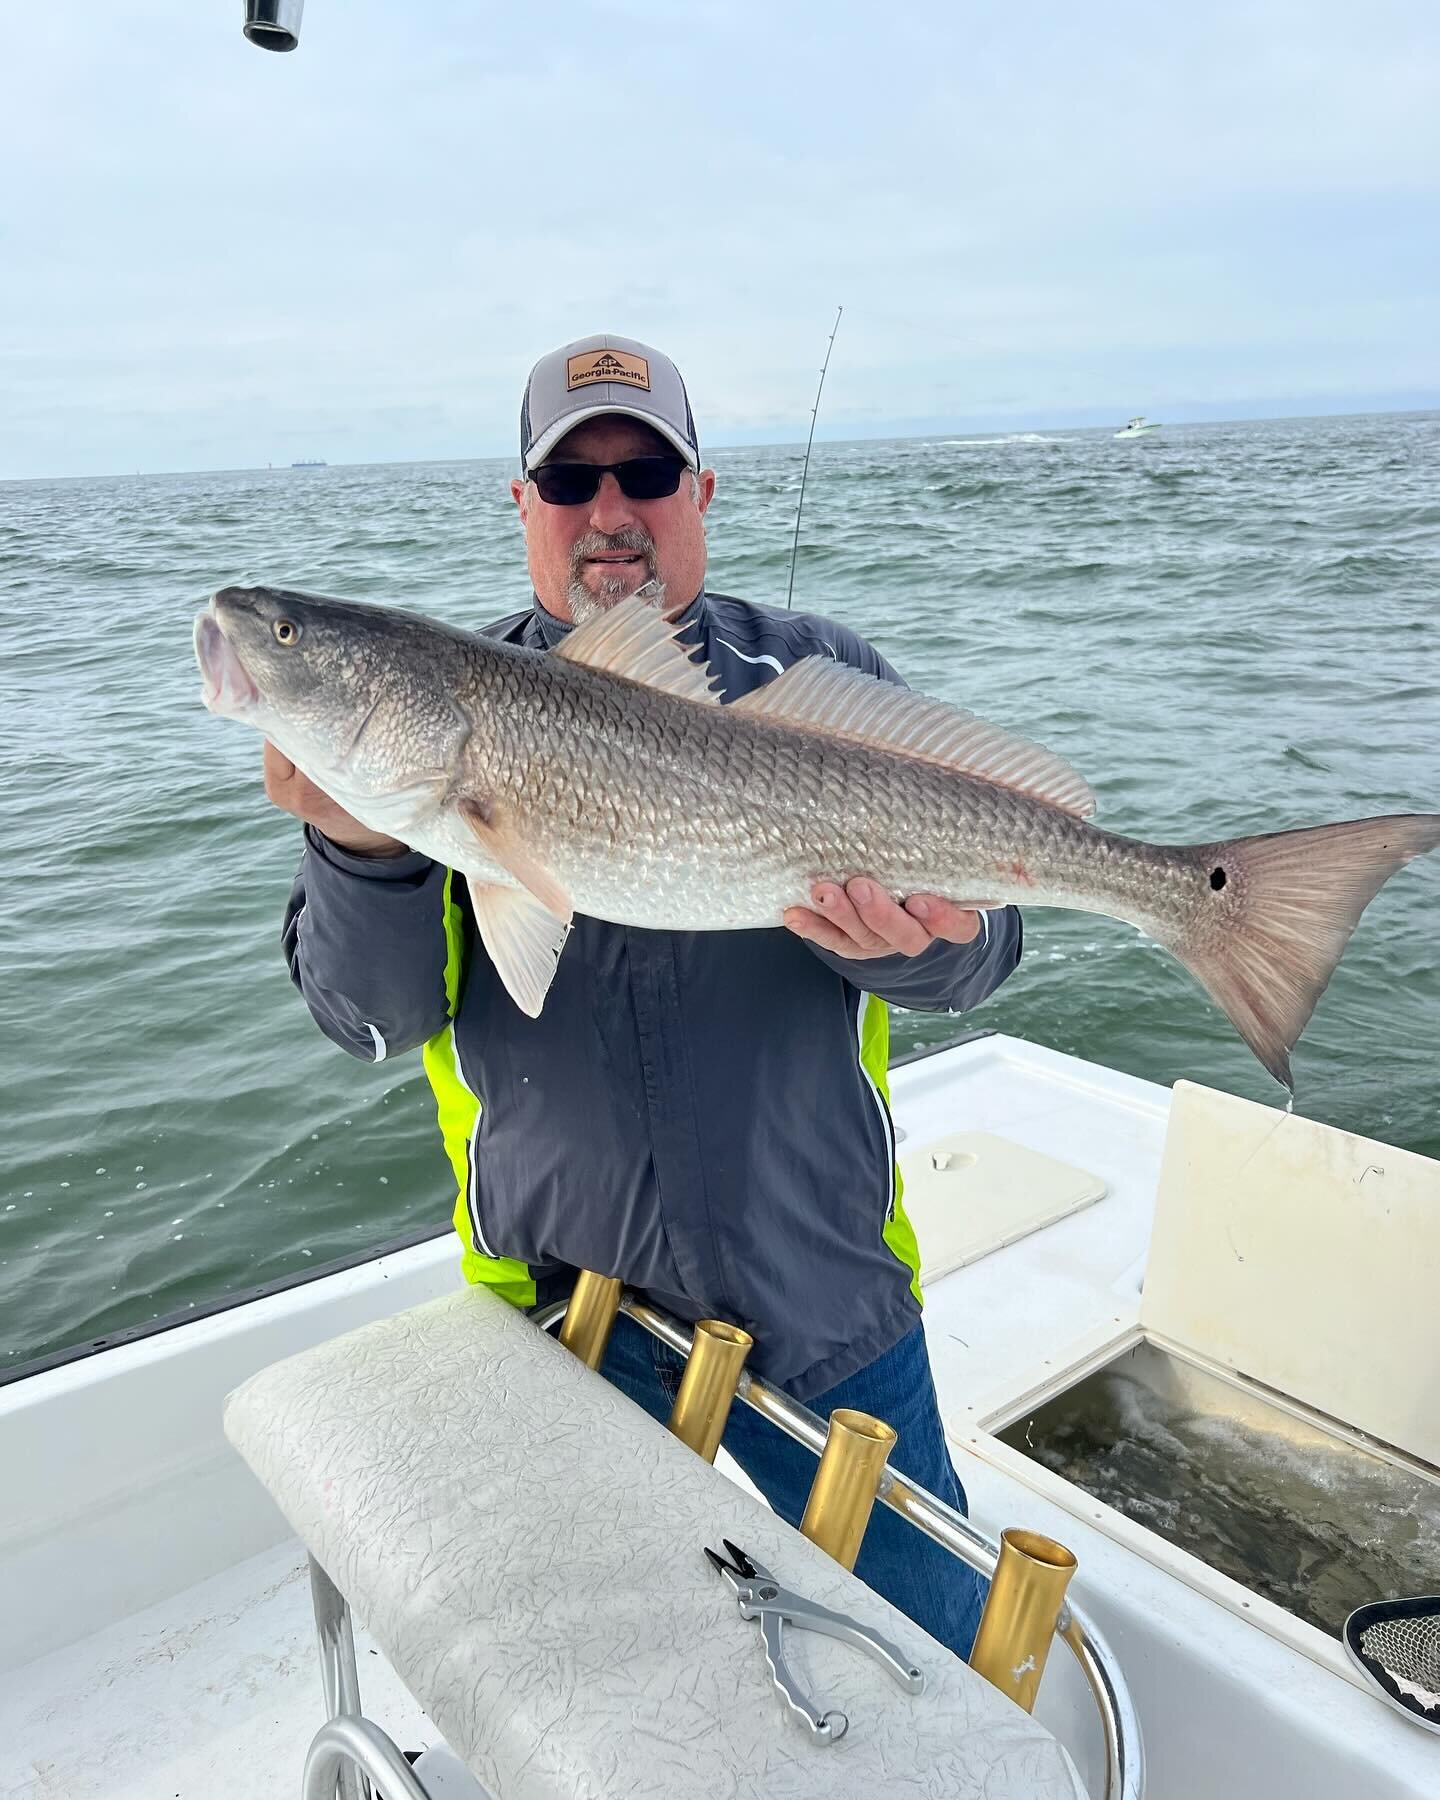 Short last min trip turned out to be a good one. We don&rsquo;t get to do this enough, but thanks for going dad I had a great time catching some giants with you!!!
.
.
.
.
.
Double C Charters
📞(850) 896-9038

#fishingguide #guided #fishpcb #familyfu